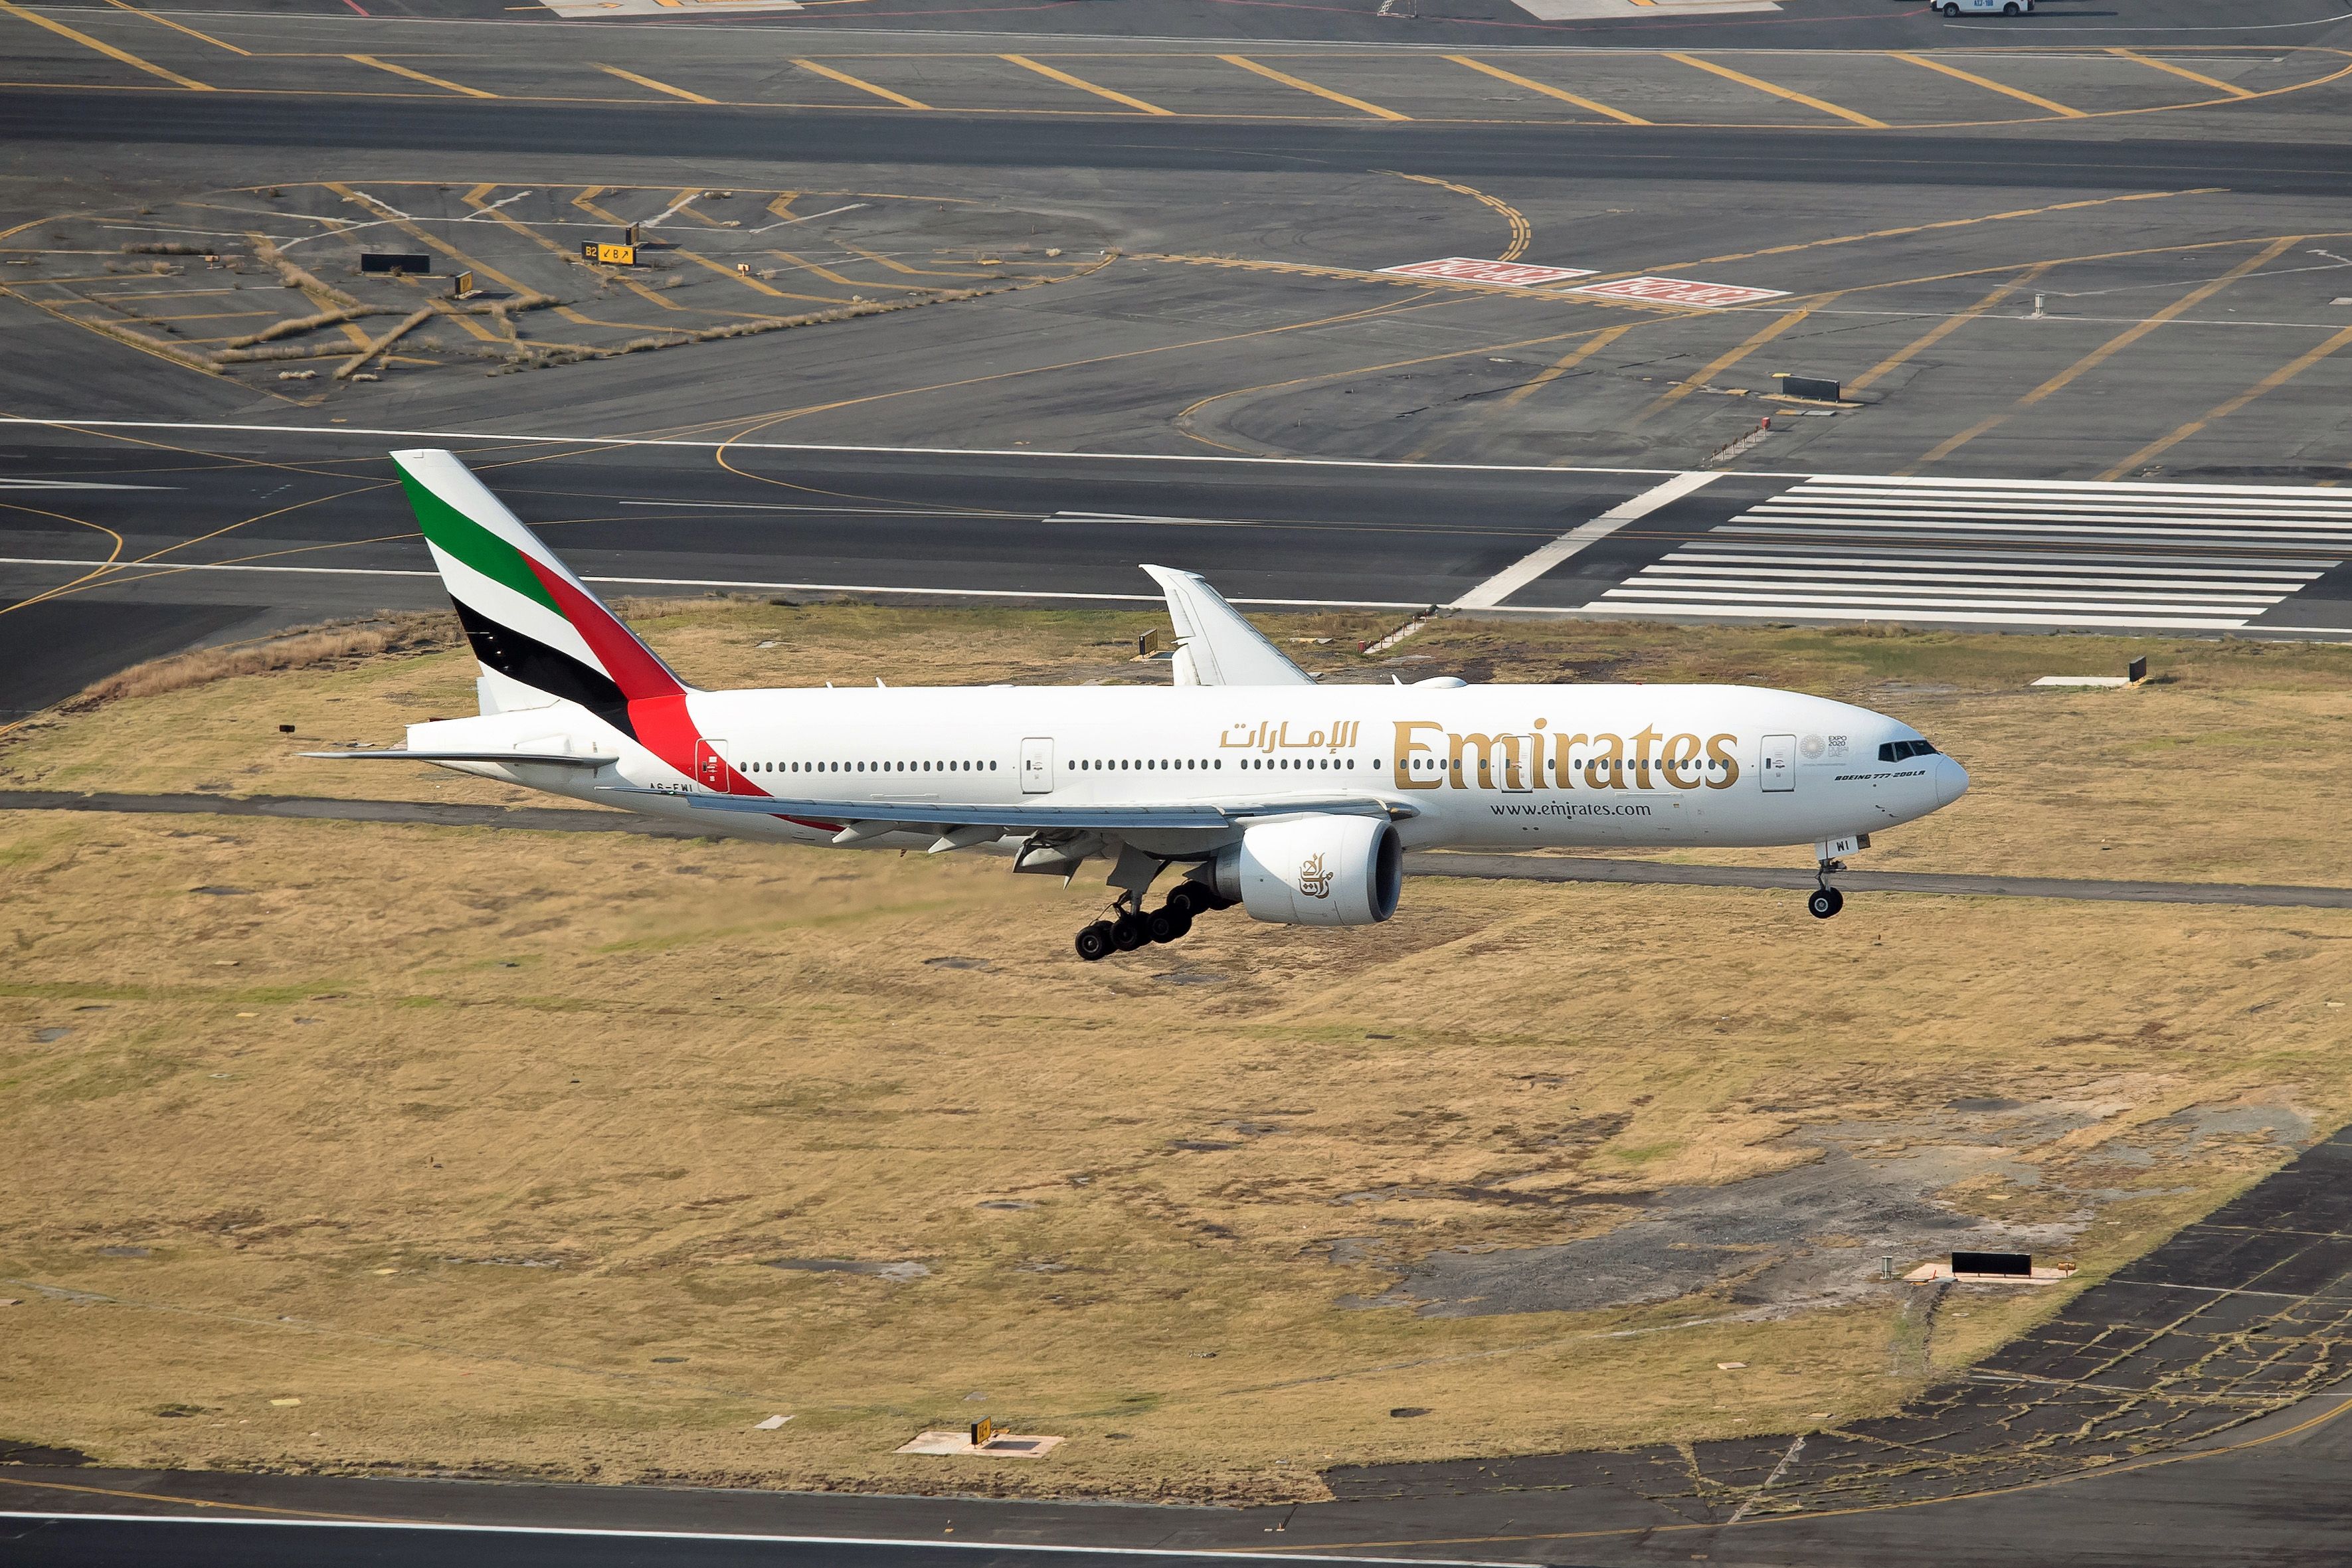 An Emirates 777 aircraft landing in Mexico City